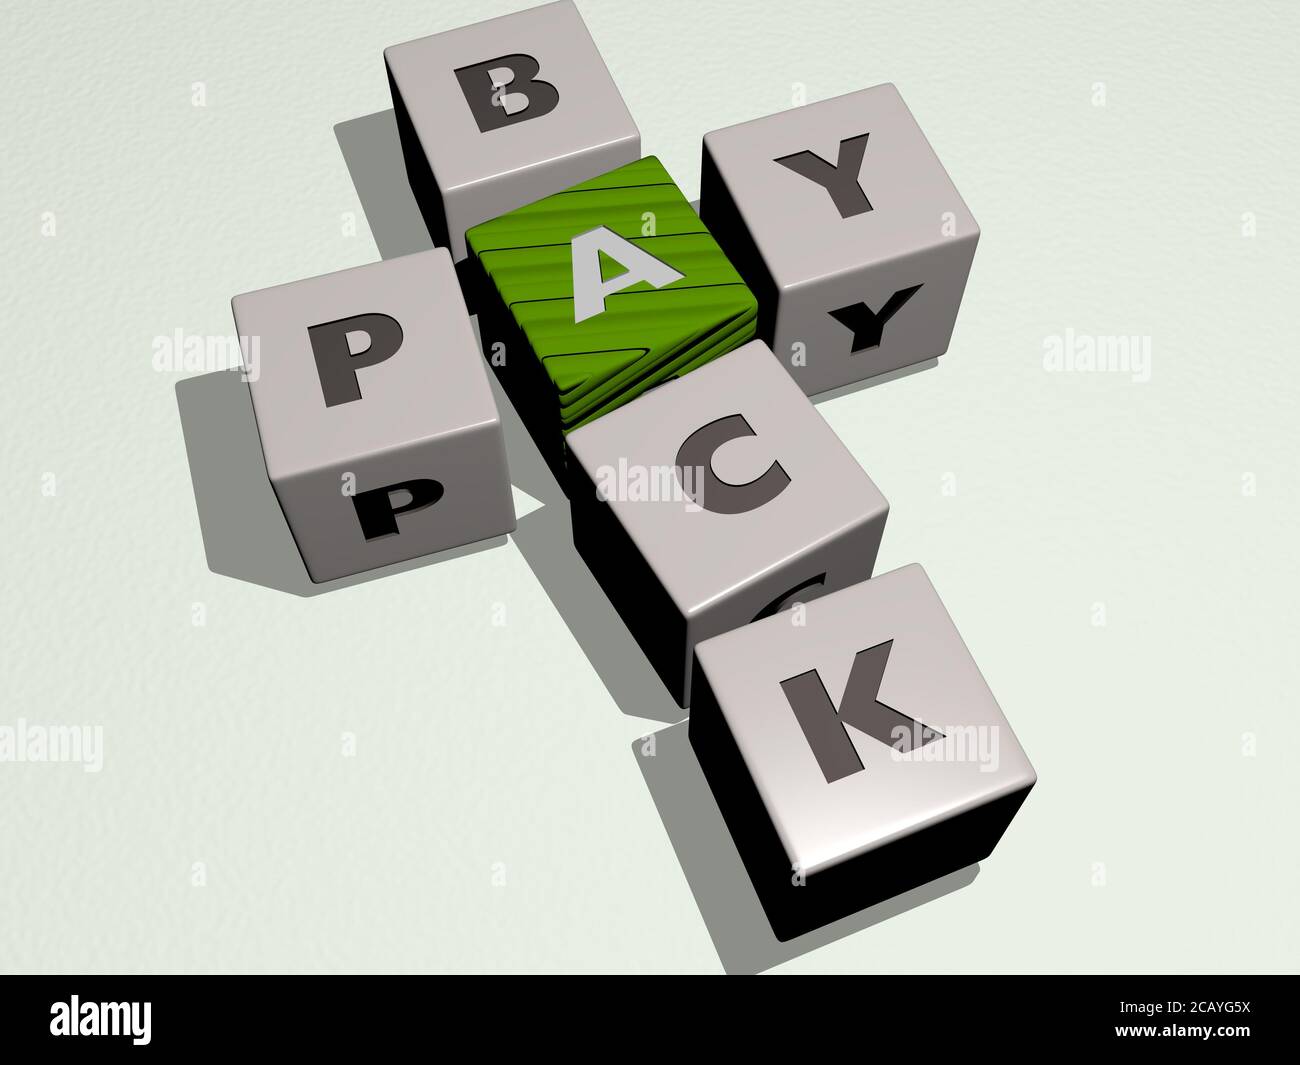 thank you: PAY BACK crossword by cubic dice letters. 3D illustration. business and concept Stock Photo